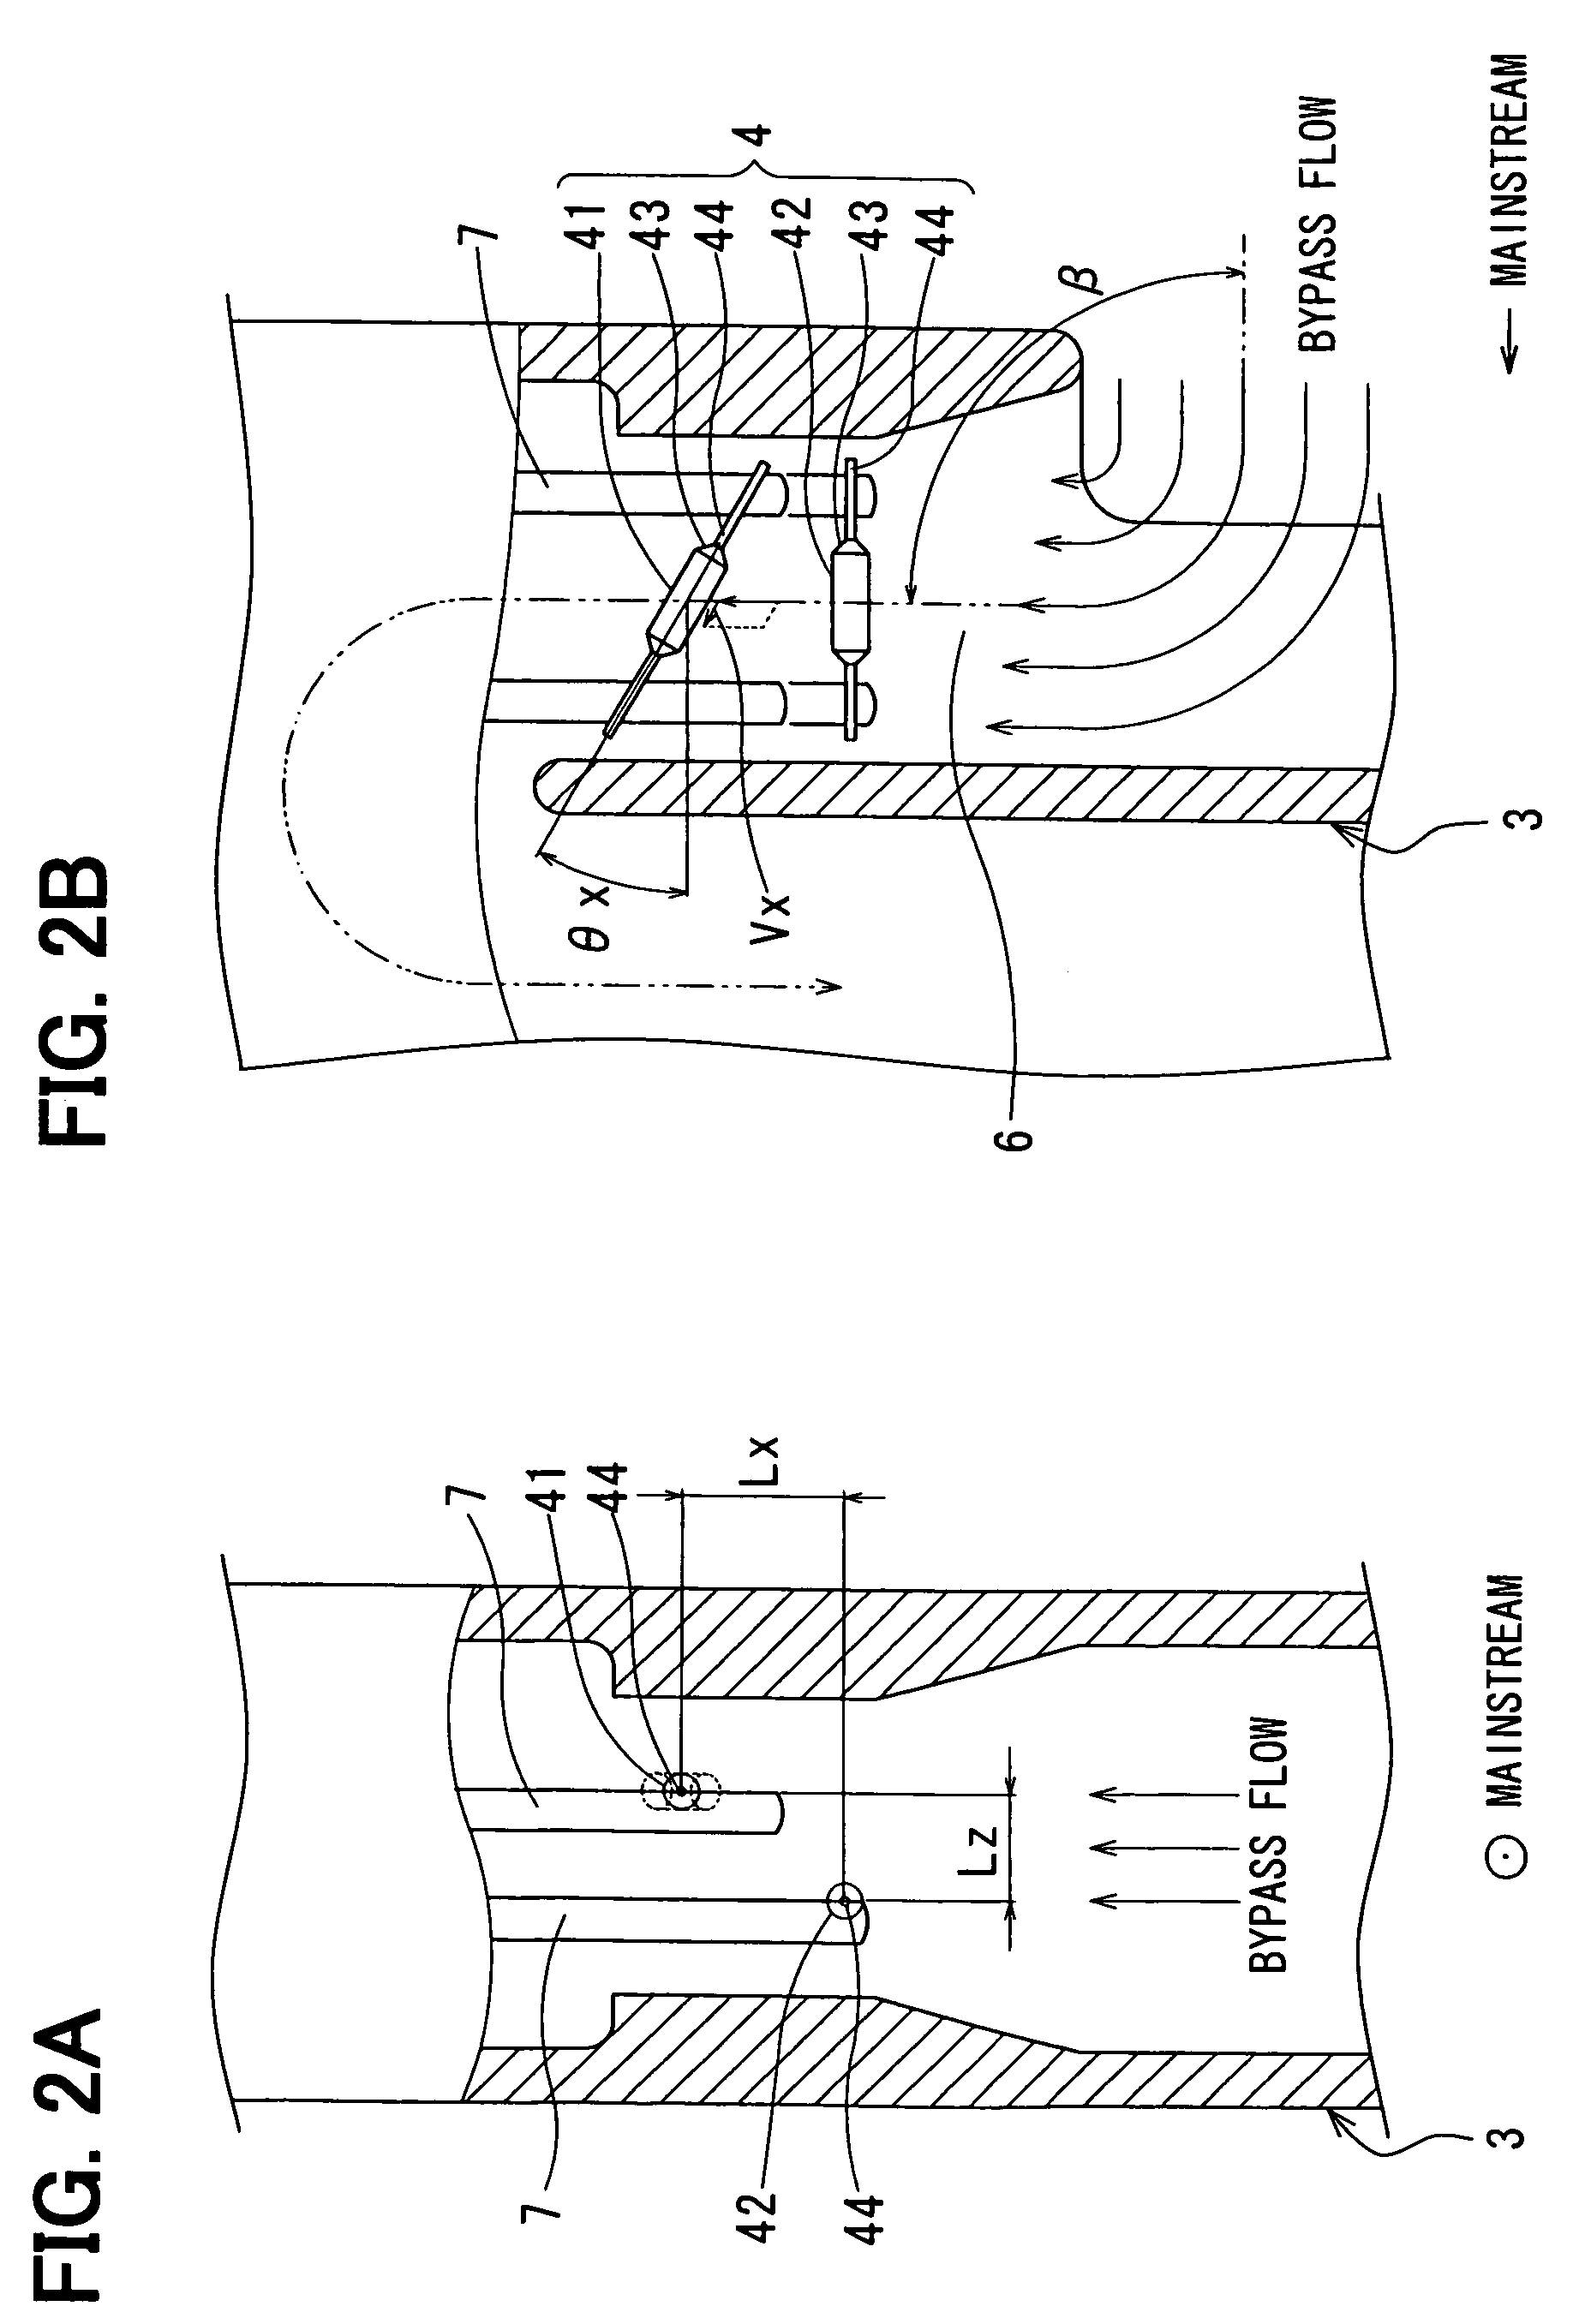 Flow measuring device having heating resistor in inclined position with respect to the flow direction